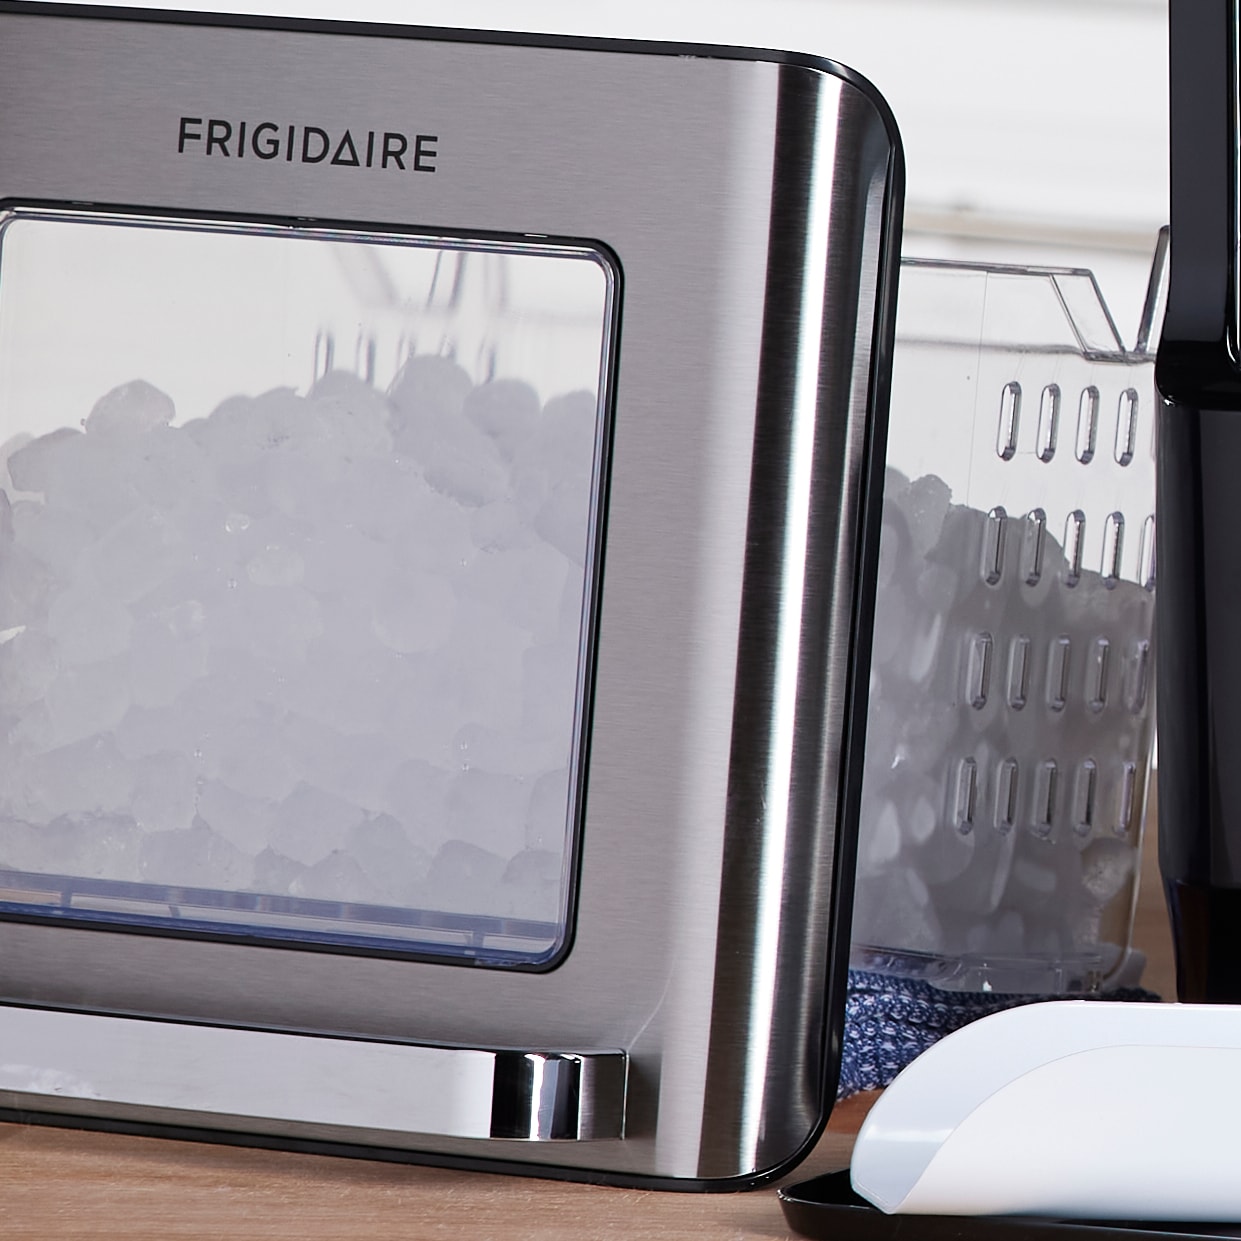 Frigidaire Gallery Crunchy Chewable Nugget Ice Maker, Countertop – RJP  Unlimited